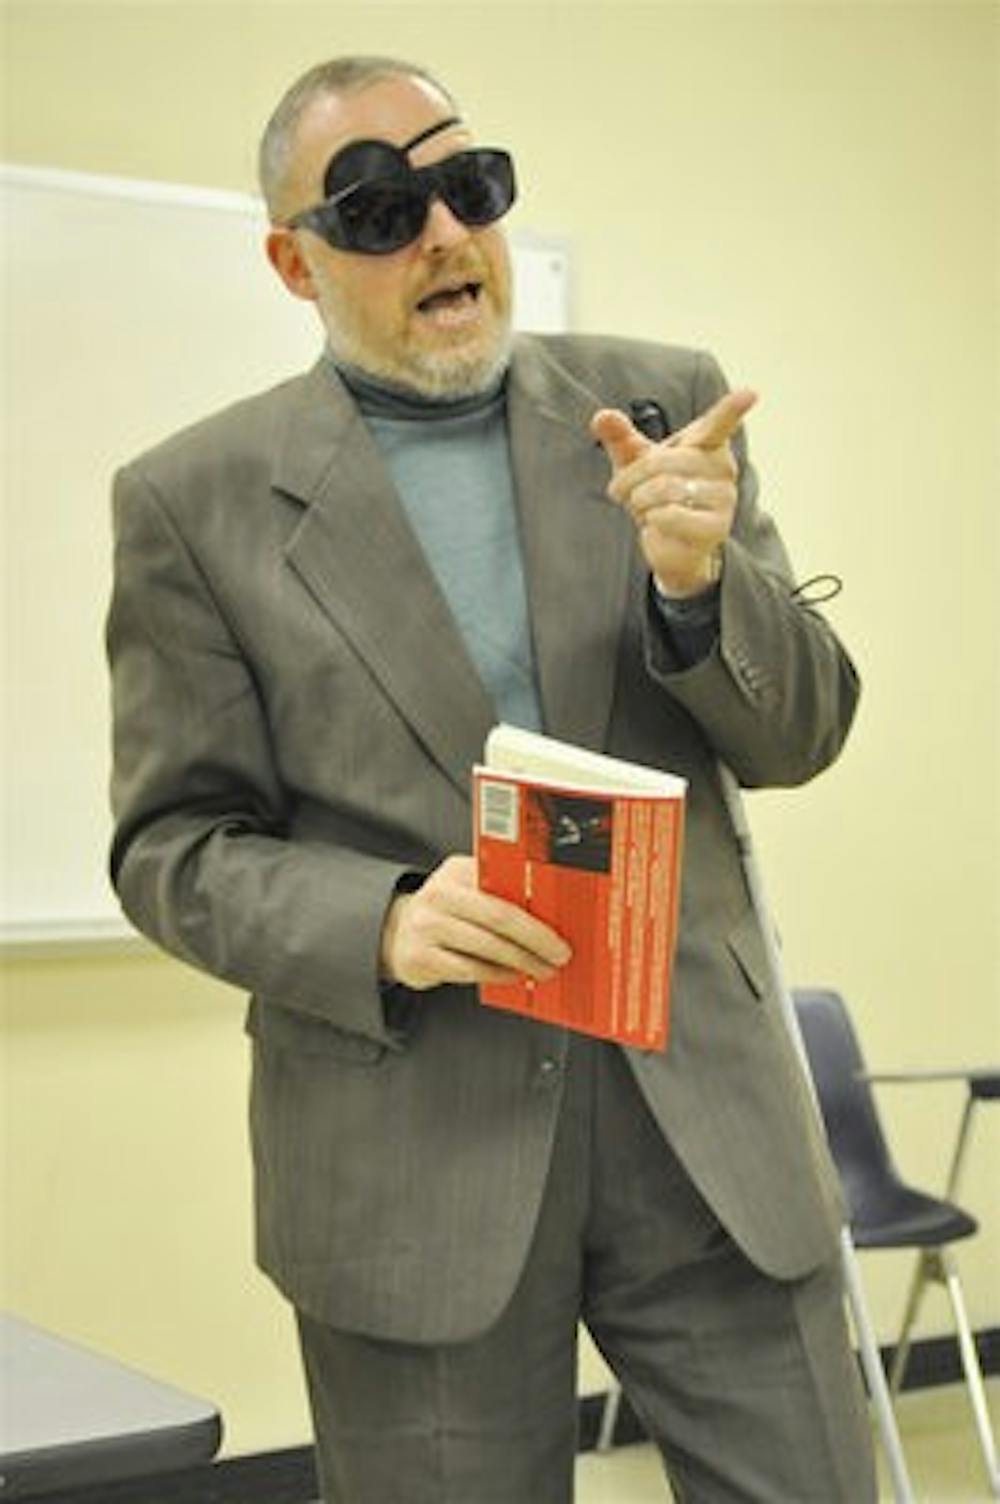 Marc Silverstein discusses "The Red Letter Plays" by Suzan-Lori Parks with his Contemporary American Literature class. (Kelly Tsaltas / PHOTO STAFF)